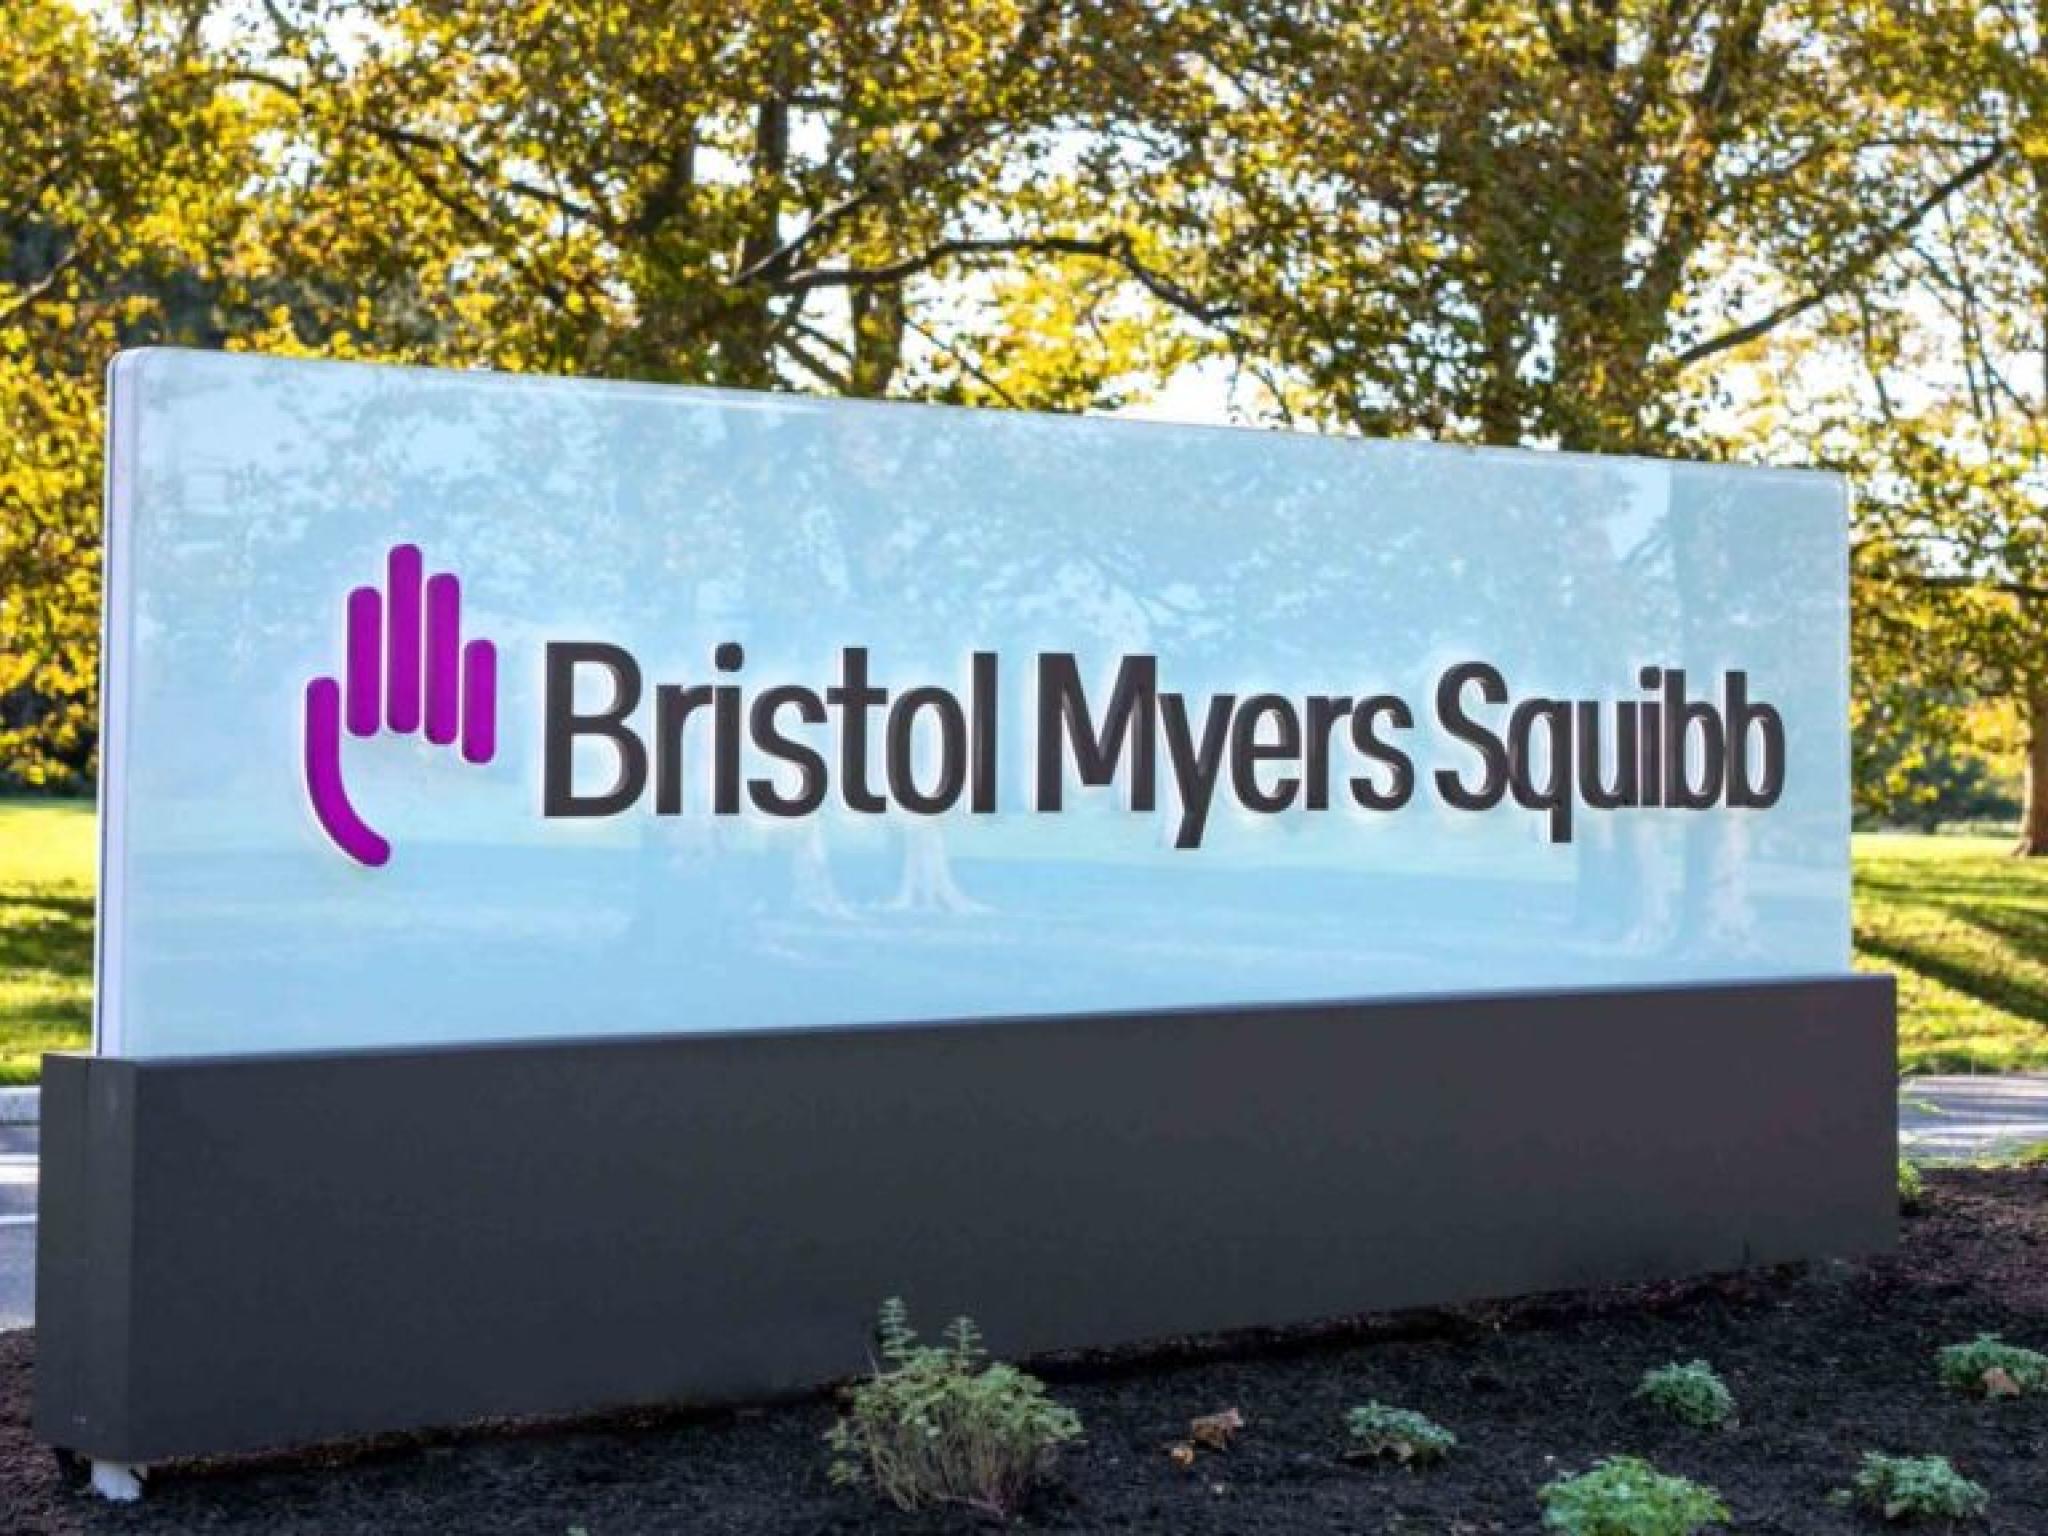  fda-approves-bristol-myers2seventy-bios-abecma-for-earlier-use-in-pretreated-blood-cancer-patients-with-updated-boxed-warning-on-secondary-cancer 